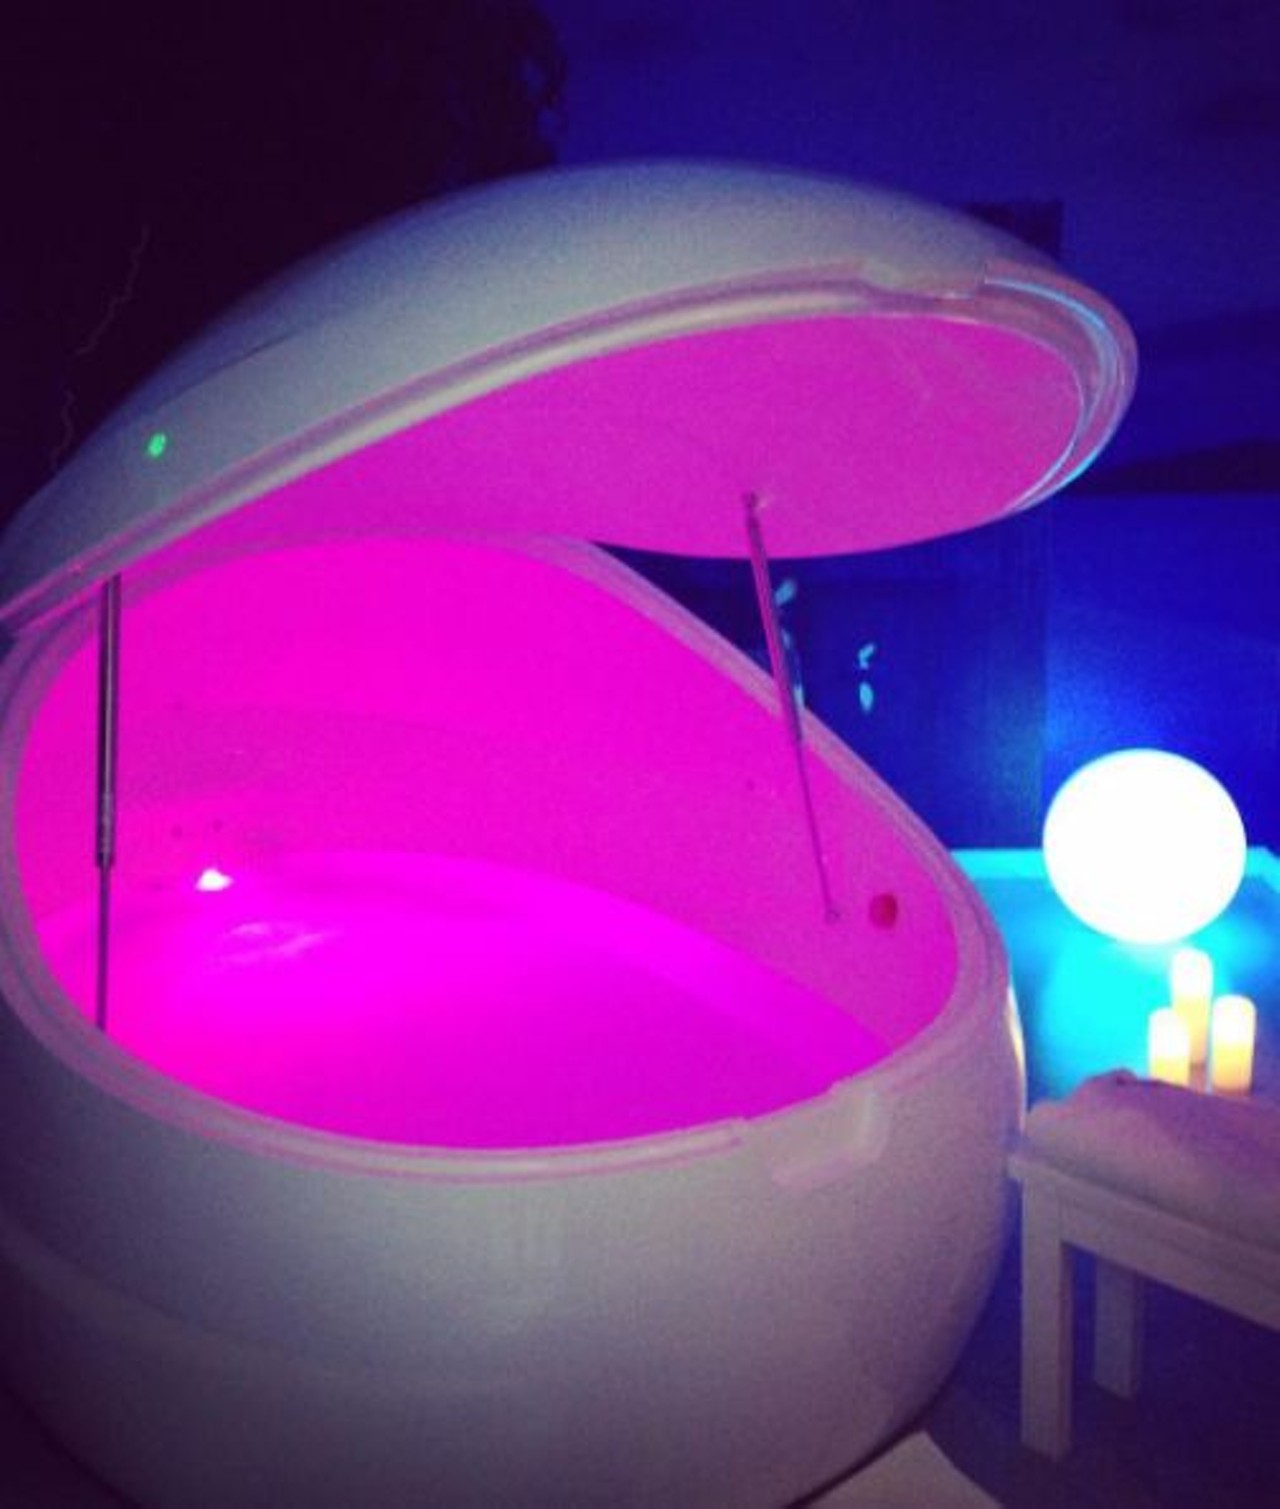 Try one of those sensory deprivation tanks 
Want a legit out-of-body experience? There is a place in Farmington Hills that has the tanks.&nbsp;Photo via IG user @classykracken